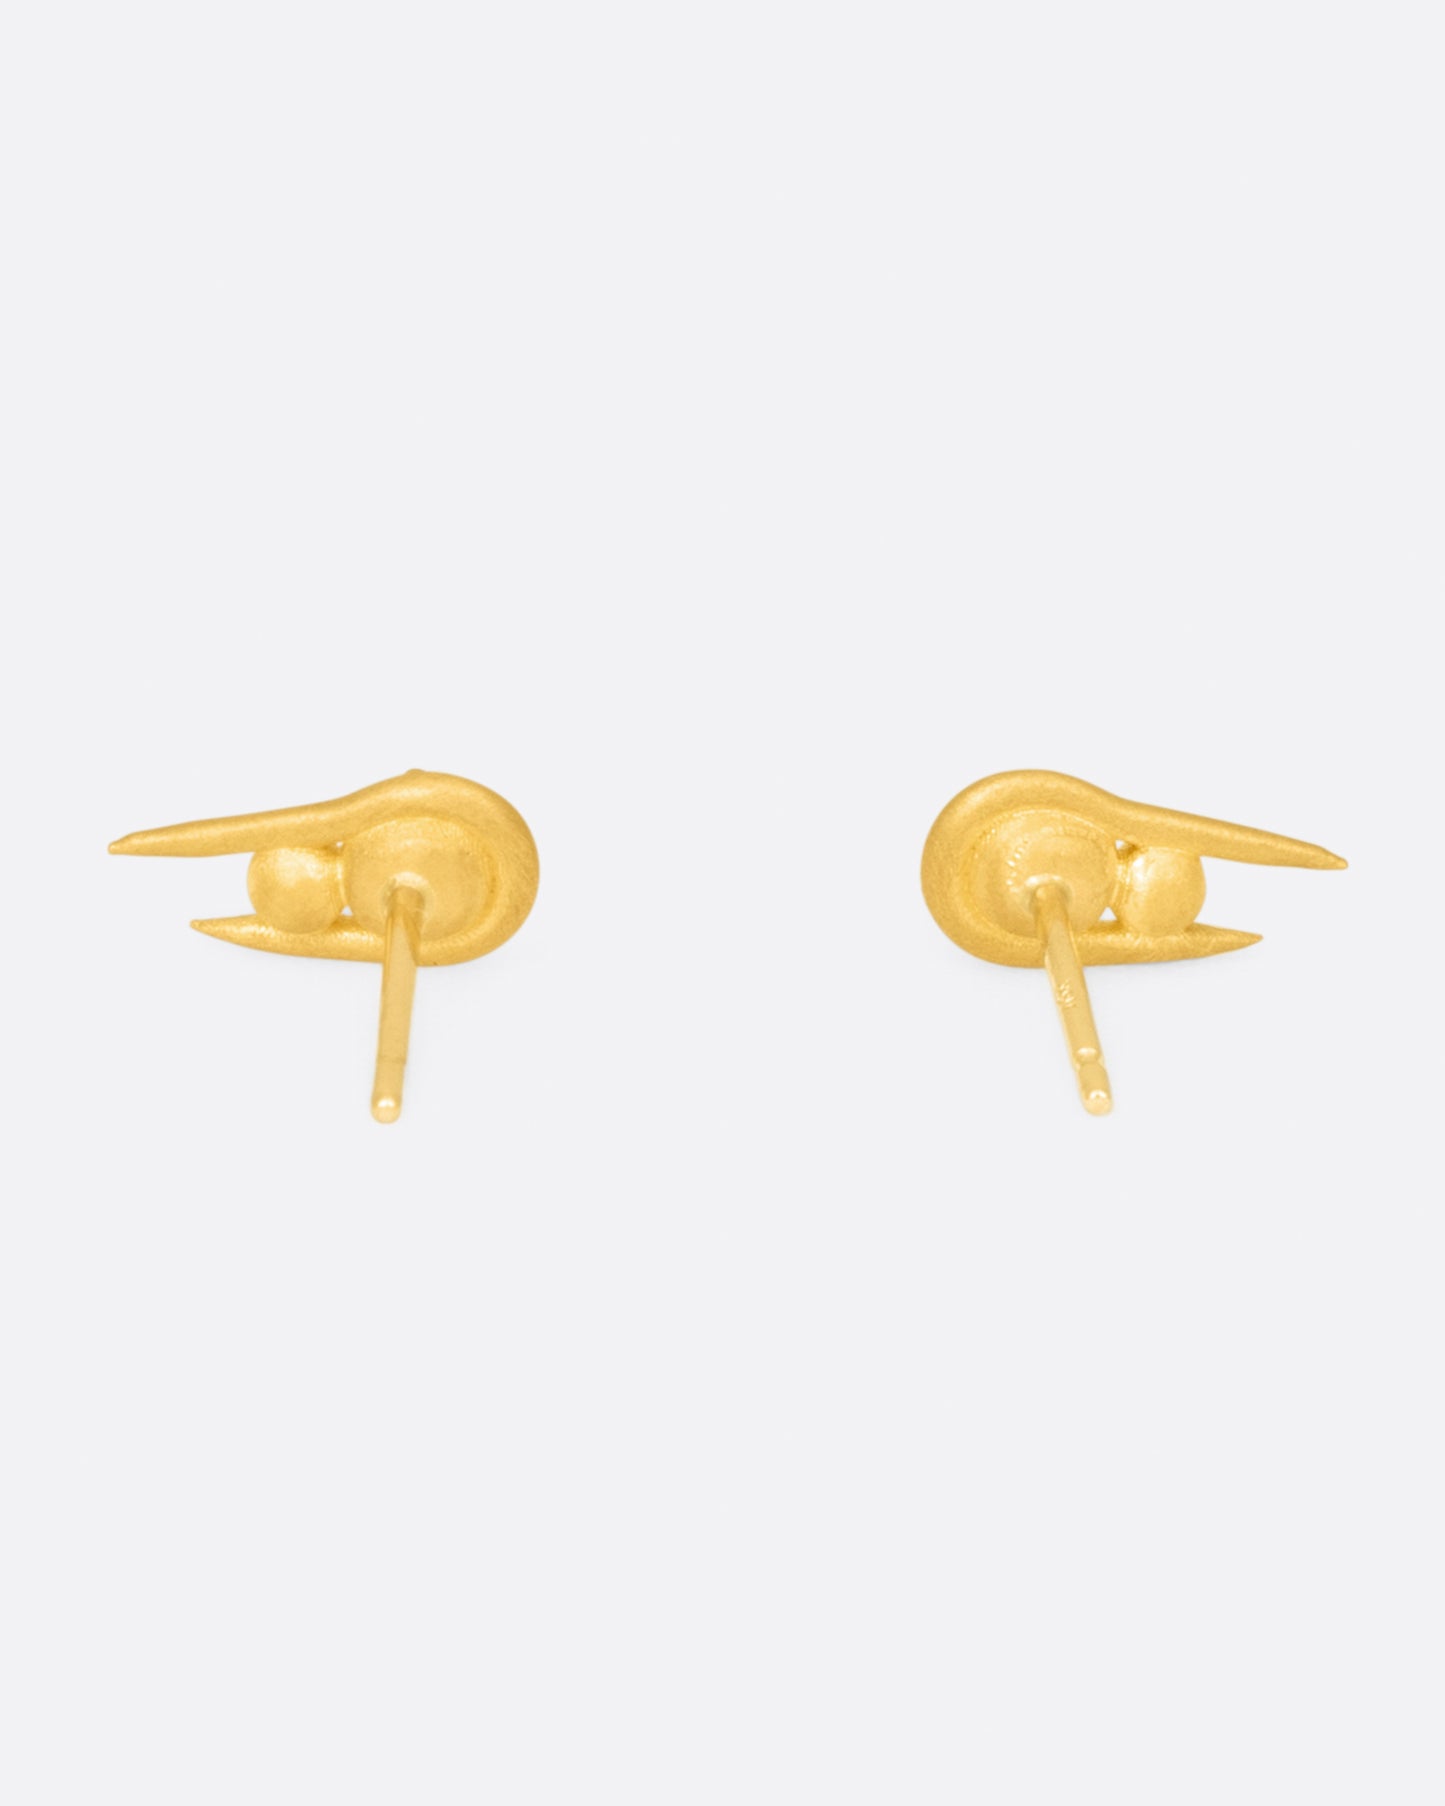 A pair of U-shaped high karat gold stud earrings with two stacked spheres at their centers, shown from the back.